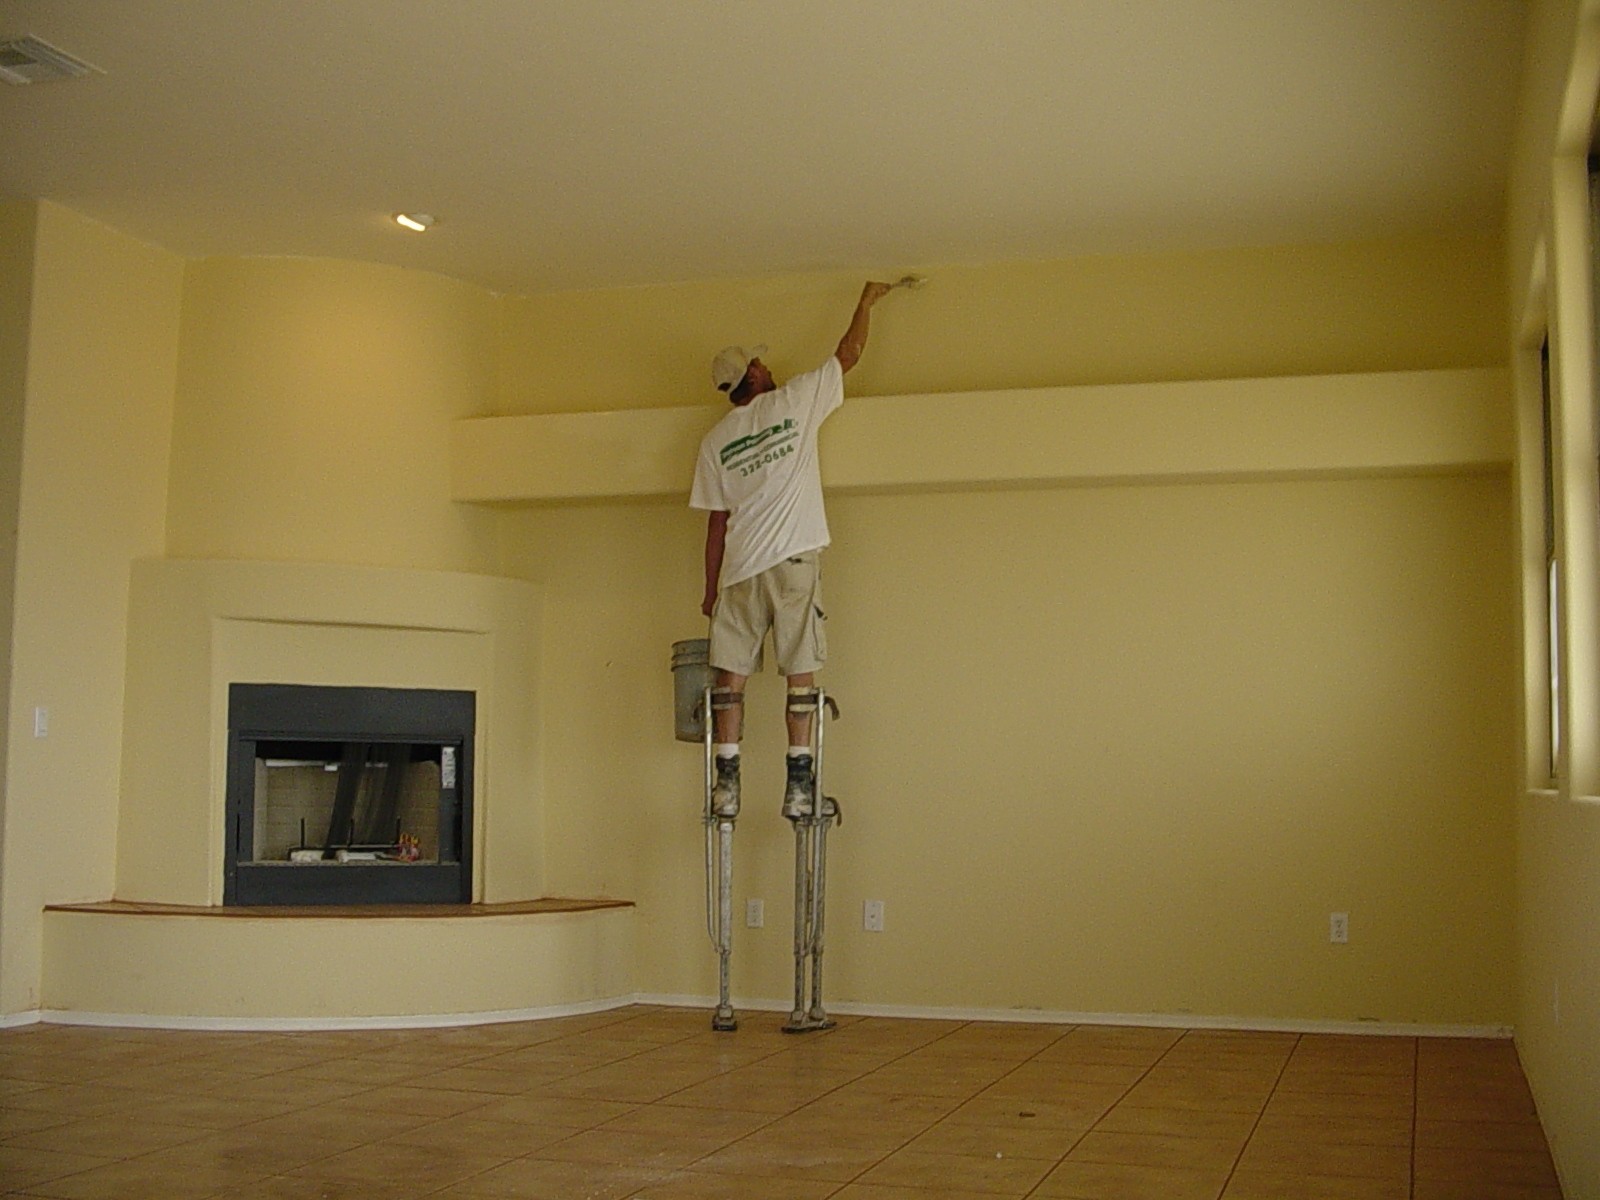 Residential Painting-League City TX Professional Painting Contractors-We offer Residential & Commercial Painting, Interior Painting, Exterior Painting, Primer Painting, Industrial Painting, Professional Painters, Institutional Painters, and more.